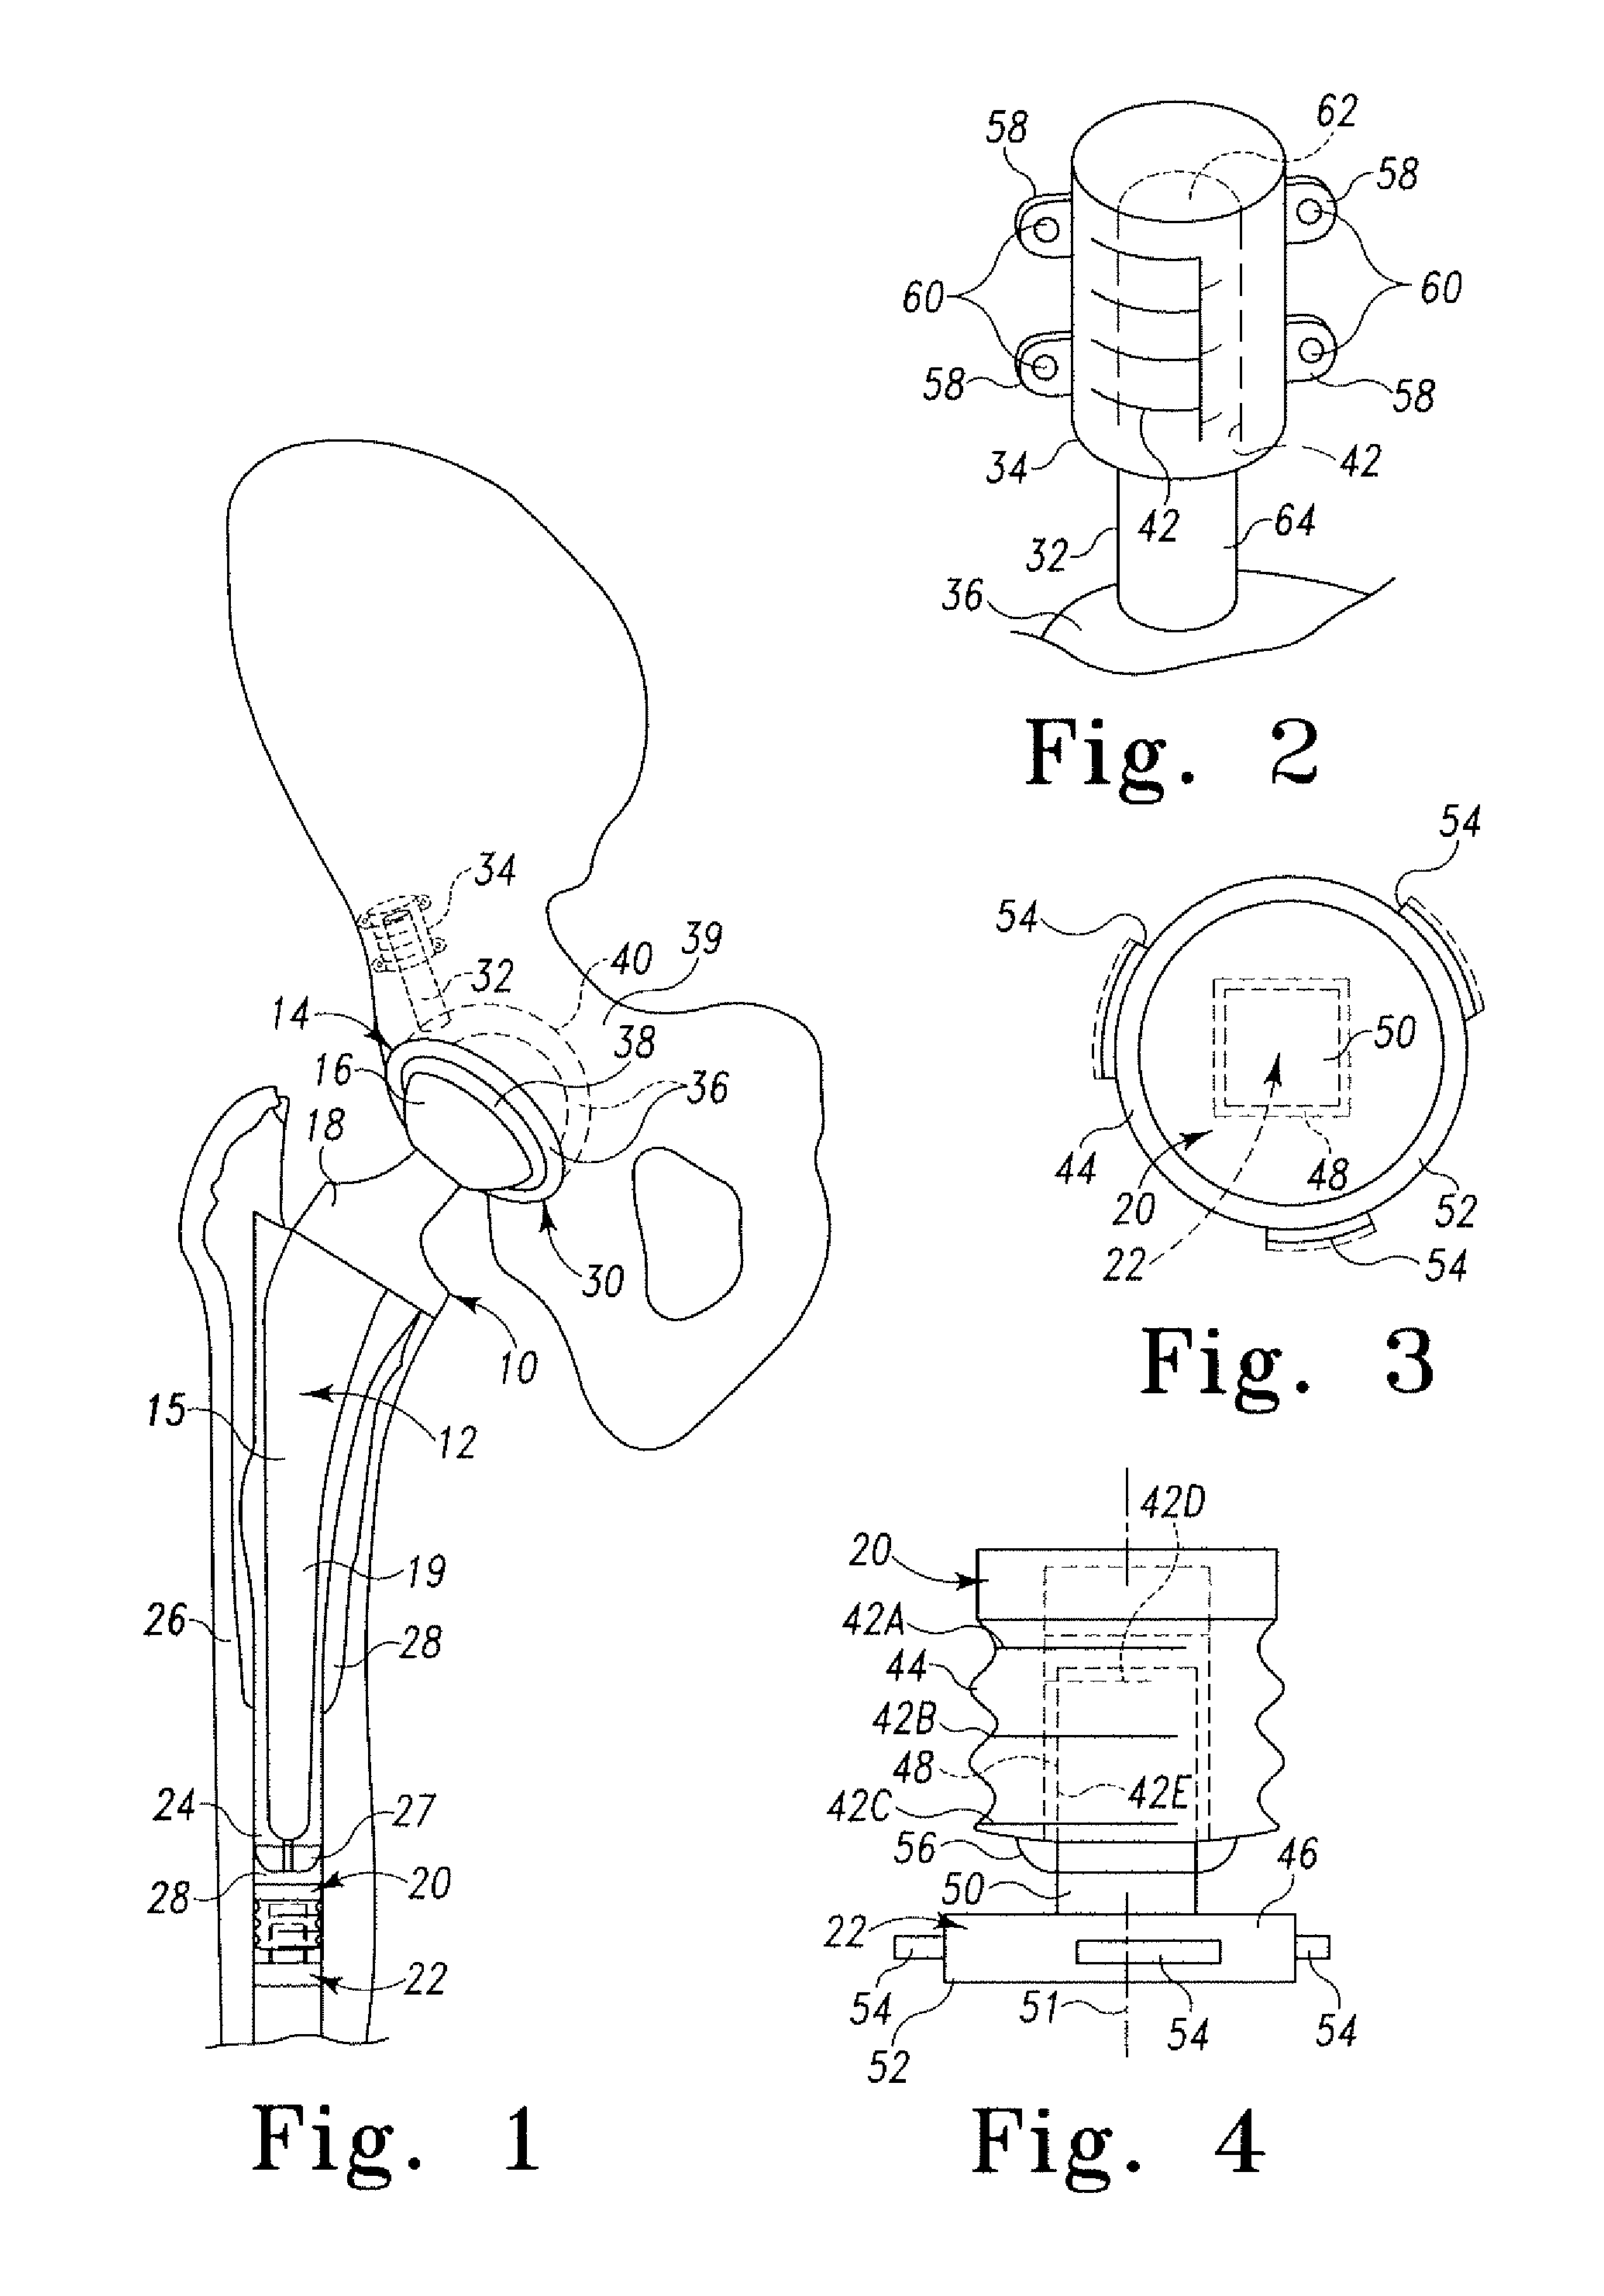 Implant system with migration measurement capacity